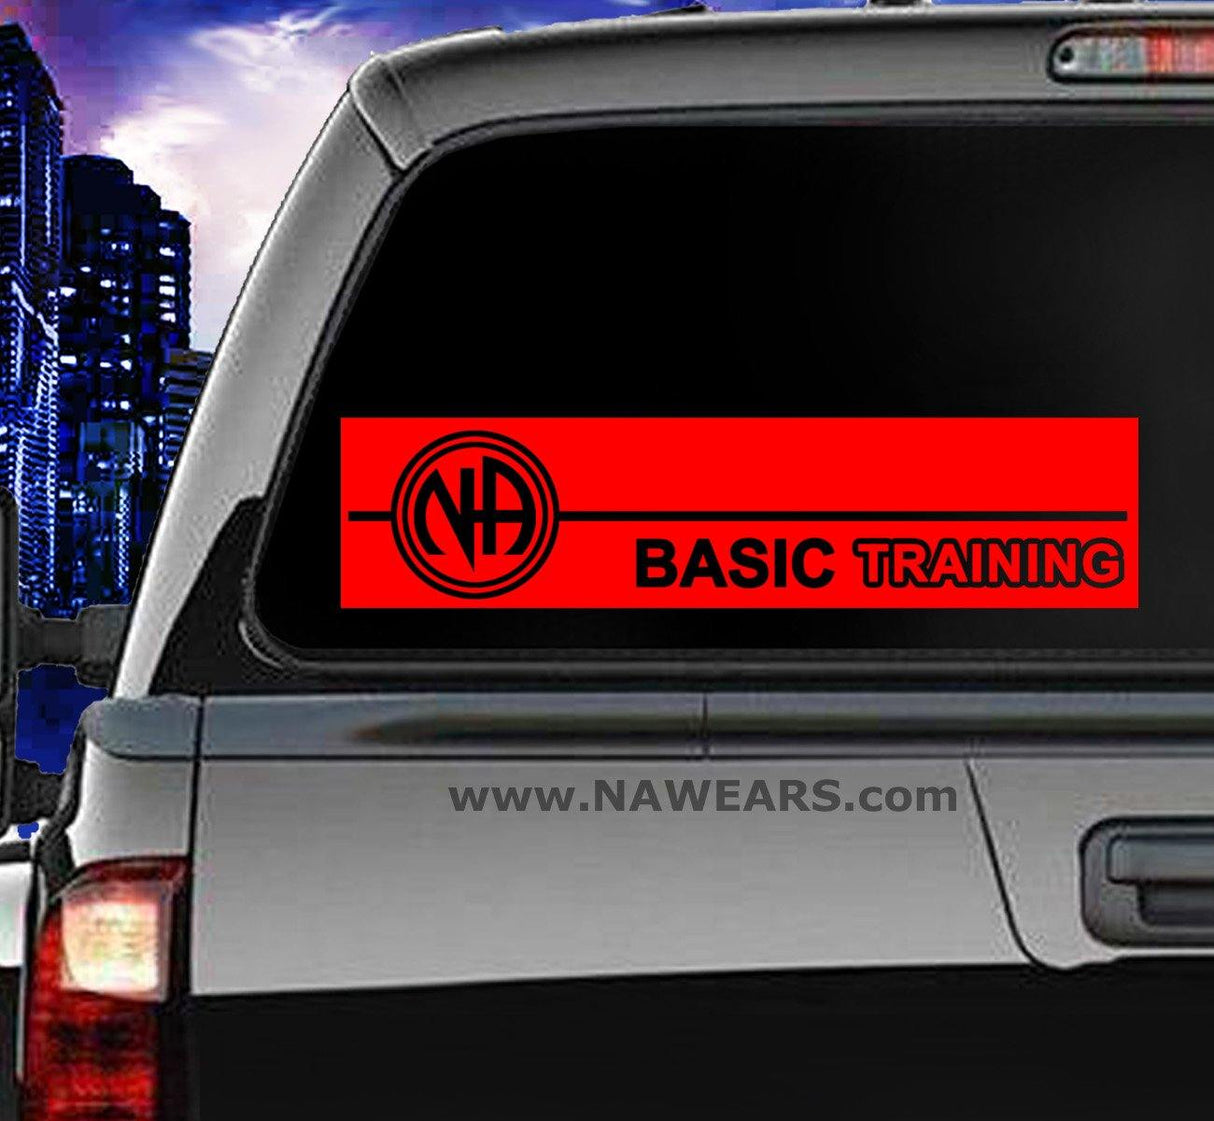 Win Decal - Basic Training Decals - nawears